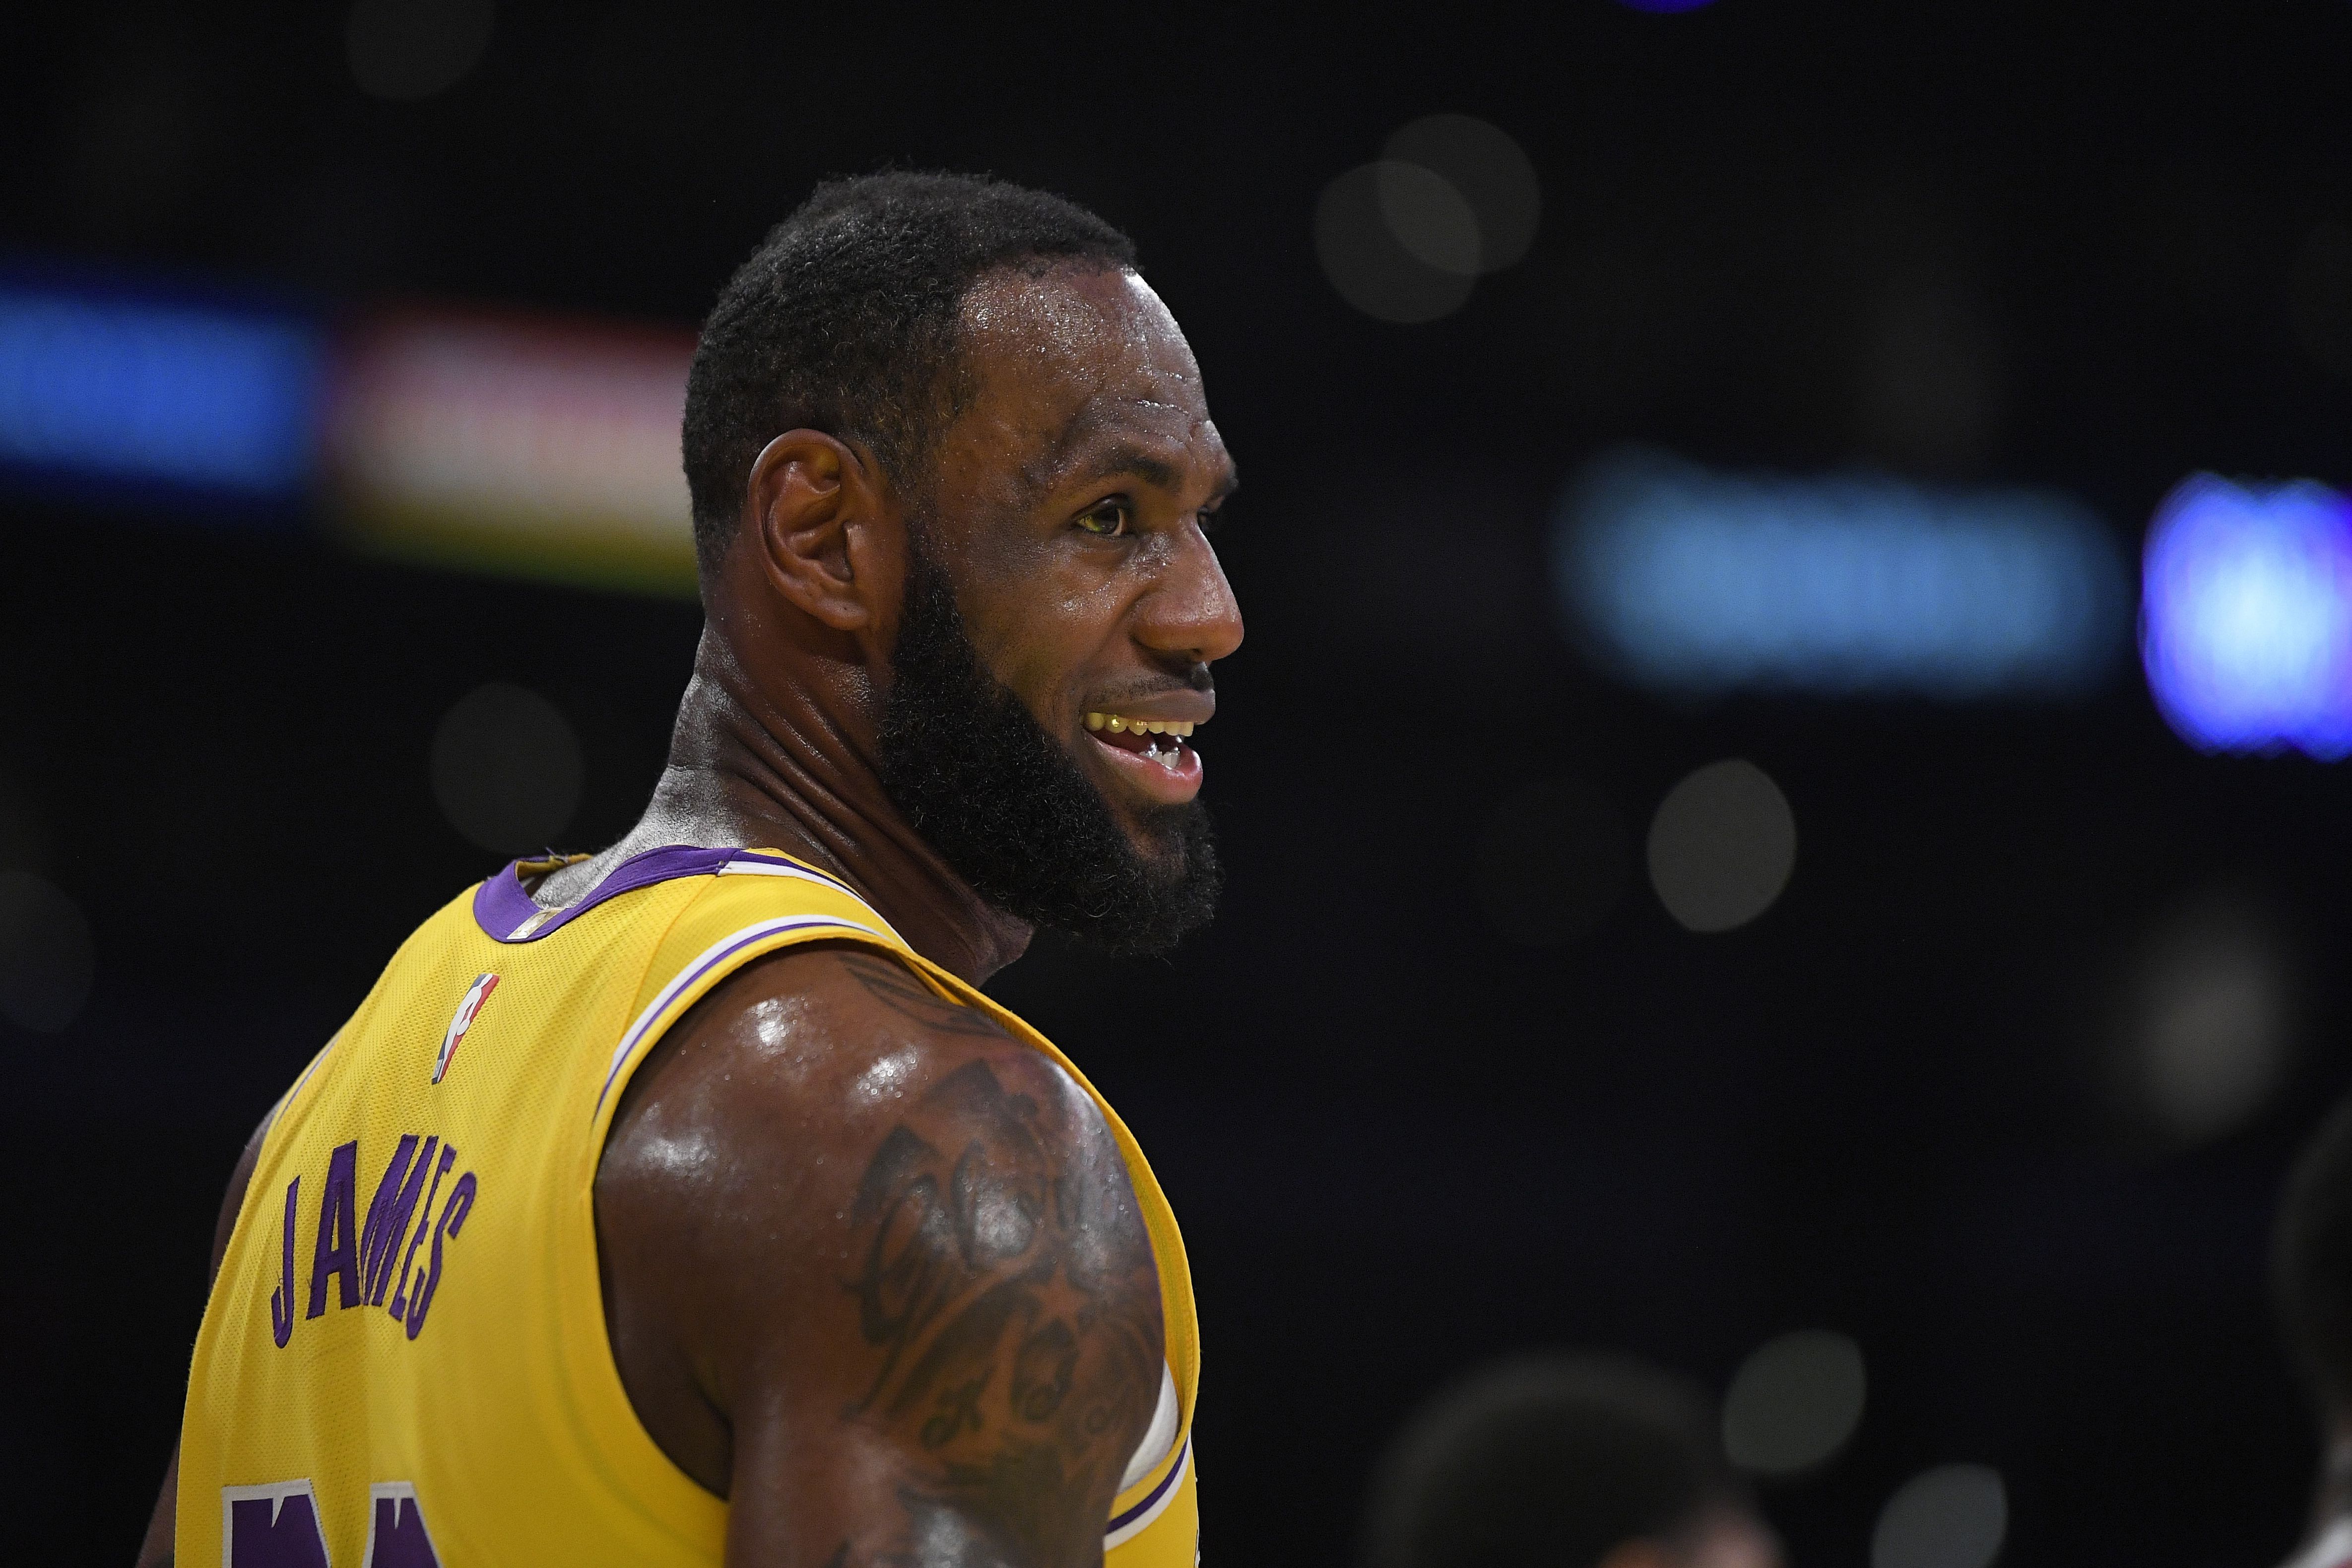 LeBron James has message that won't be on his Lakers jersey - Los